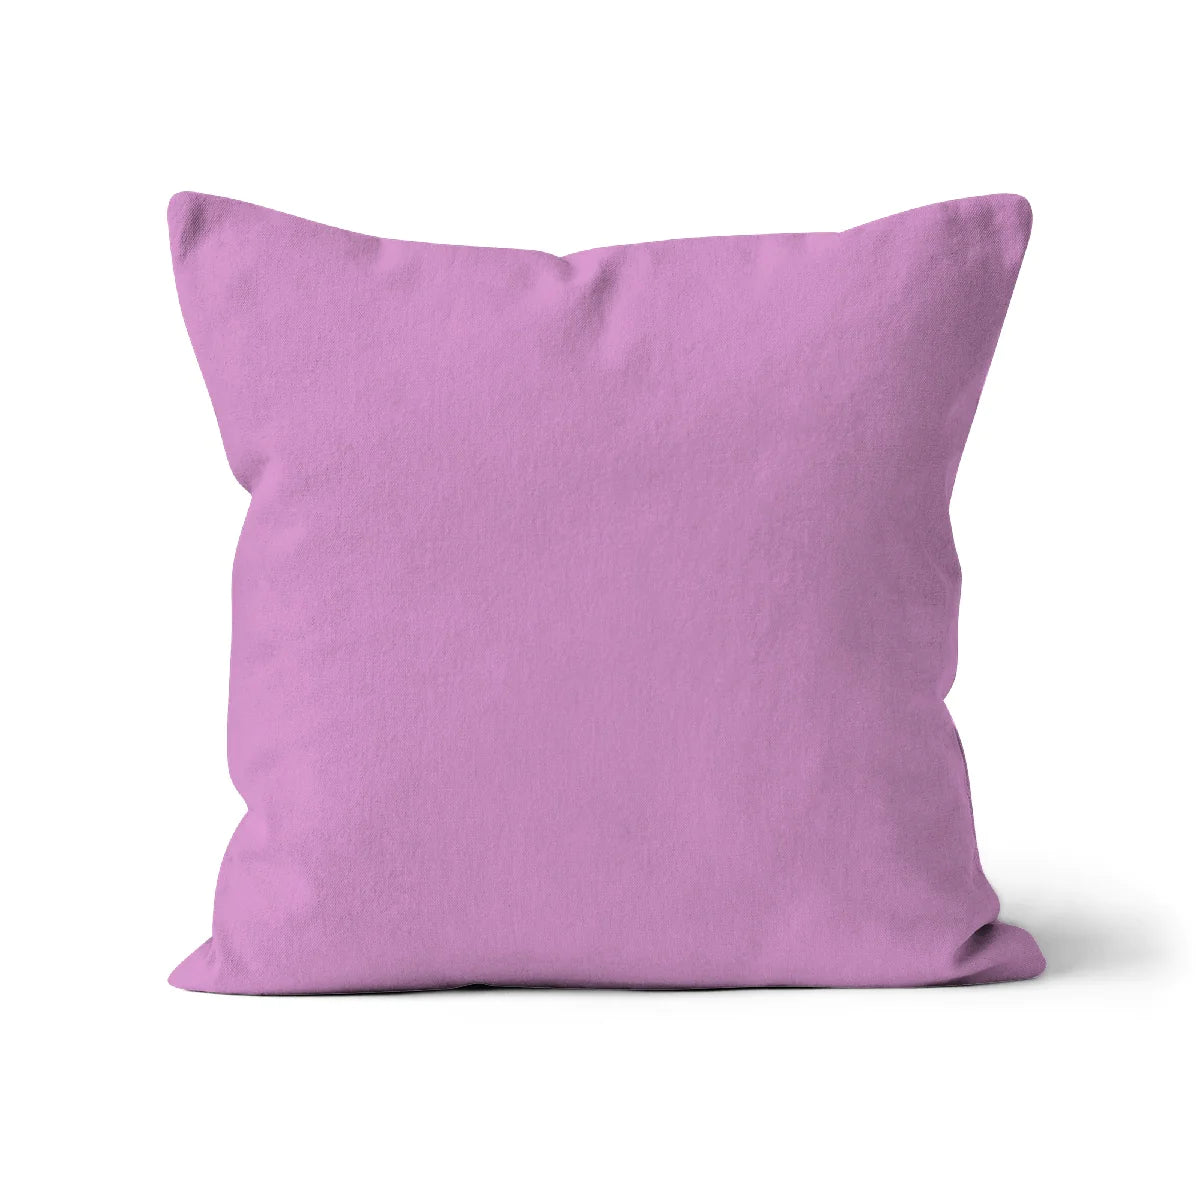 Lilac colour cushion cover. Made in the UK, removable and washable cover. Organic cotton pillow cover